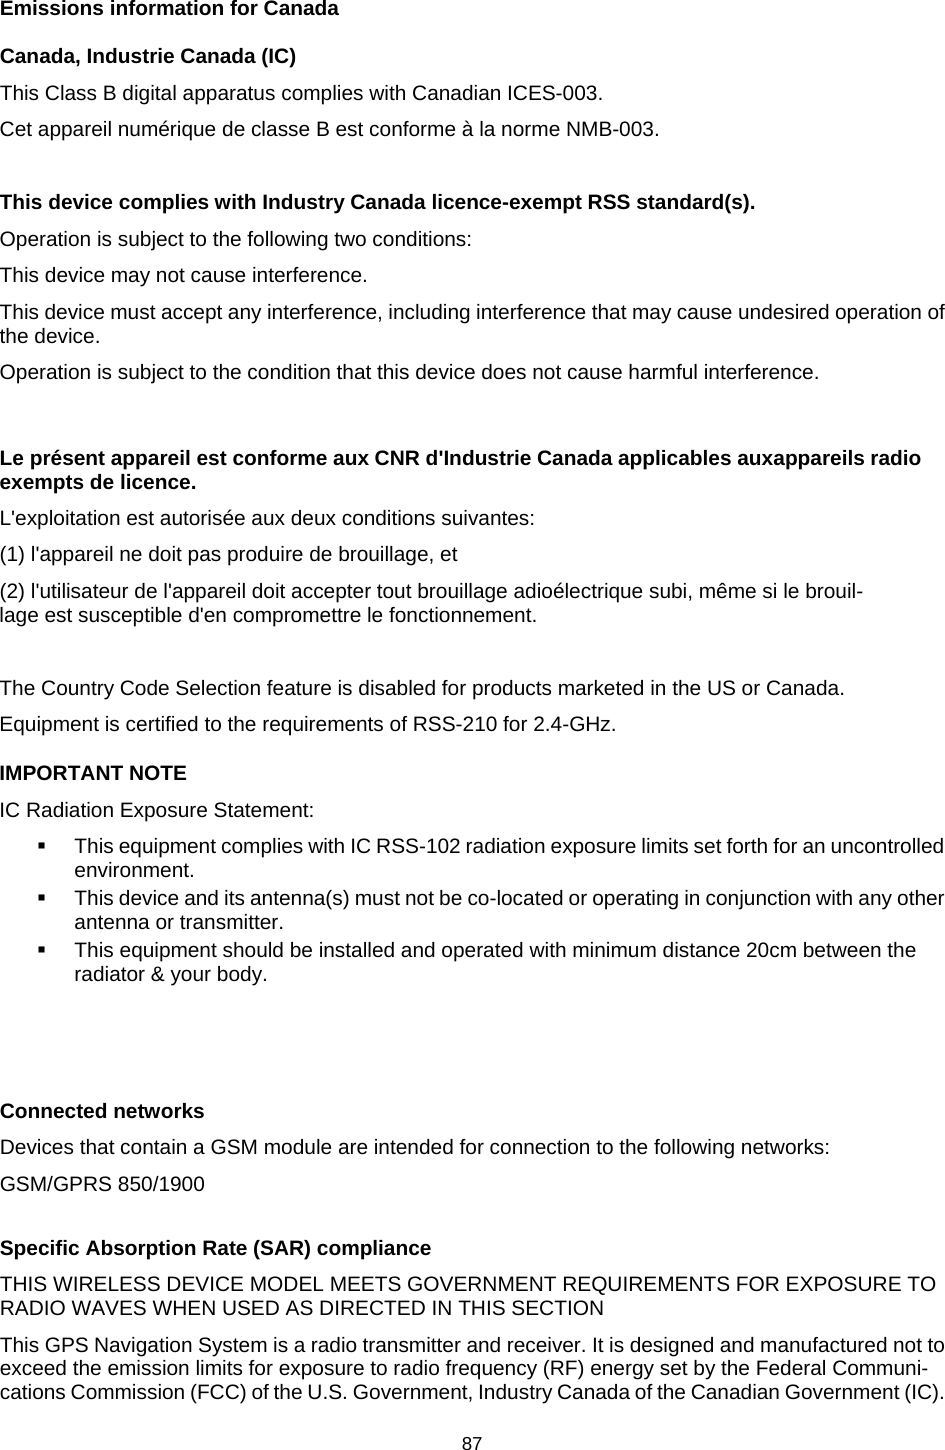  Emissions information for Canada Canada, Industrie Canada (IC) This Class B digital apparatus complies with Canadian ICES-003. Cet appareil numérique de classe B est conforme à la norme NMB-003.  This device complies with Industry Canada licence-exempt RSS standard(s).  Operation is subject to the following two conditions: This device may not cause interference. This device must accept any interference, including interference that may cause undesired operation of the device. Operation is subject to the condition that this device does not cause harmful interference.  Le présent appareil est conforme aux CNR d&apos;Industrie Canada applicables auxappareils radio exempts de licence.   L&apos;exploitation est autorisée aux deux conditions suivantes: (1) l&apos;appareil ne doit pas produire de brouillage, et (2) l&apos;utilisateur de l&apos;appareil doit accepter tout brouillage adioélectrique subi, même si le brouil-lage est susceptible d&apos;en compromettre le fonctionnement.  The Country Code Selection feature is disabled for products marketed in the US or Canada. Equipment is certified to the requirements of RSS-210 for 2.4-GHz. IMPORTANT NOTE IC Radiation Exposure Statement:  This equipment complies with IC RSS-102 radiation exposure limits set forth for an uncontrolled environment.  This device and its antenna(s) must not be co-located or operating in conjunction with any other antenna or transmitter.  This equipment should be installed and operated with minimum distance 20cm between the radiator &amp; your body.    Connected networks Devices that contain a GSM module are intended for connection to the following networks: GSM/GPRS 850/1900  Specific Absorption Rate (SAR) compliance THIS WIRELESS DEVICE MODEL MEETS GOVERNMENT REQUIREMENTS FOR EXPOSURE TO RADIO WAVES WHEN USED AS DIRECTED IN THIS SECTION This GPS Navigation System is a radio transmitter and receiver. It is designed and manufactured not to exceed the emission limits for exposure to radio frequency (RF) energy set by the Federal Communi-cations Commission (FCC) of the U.S. Government, Industry Canada of the Canadian Government (IC). 87   